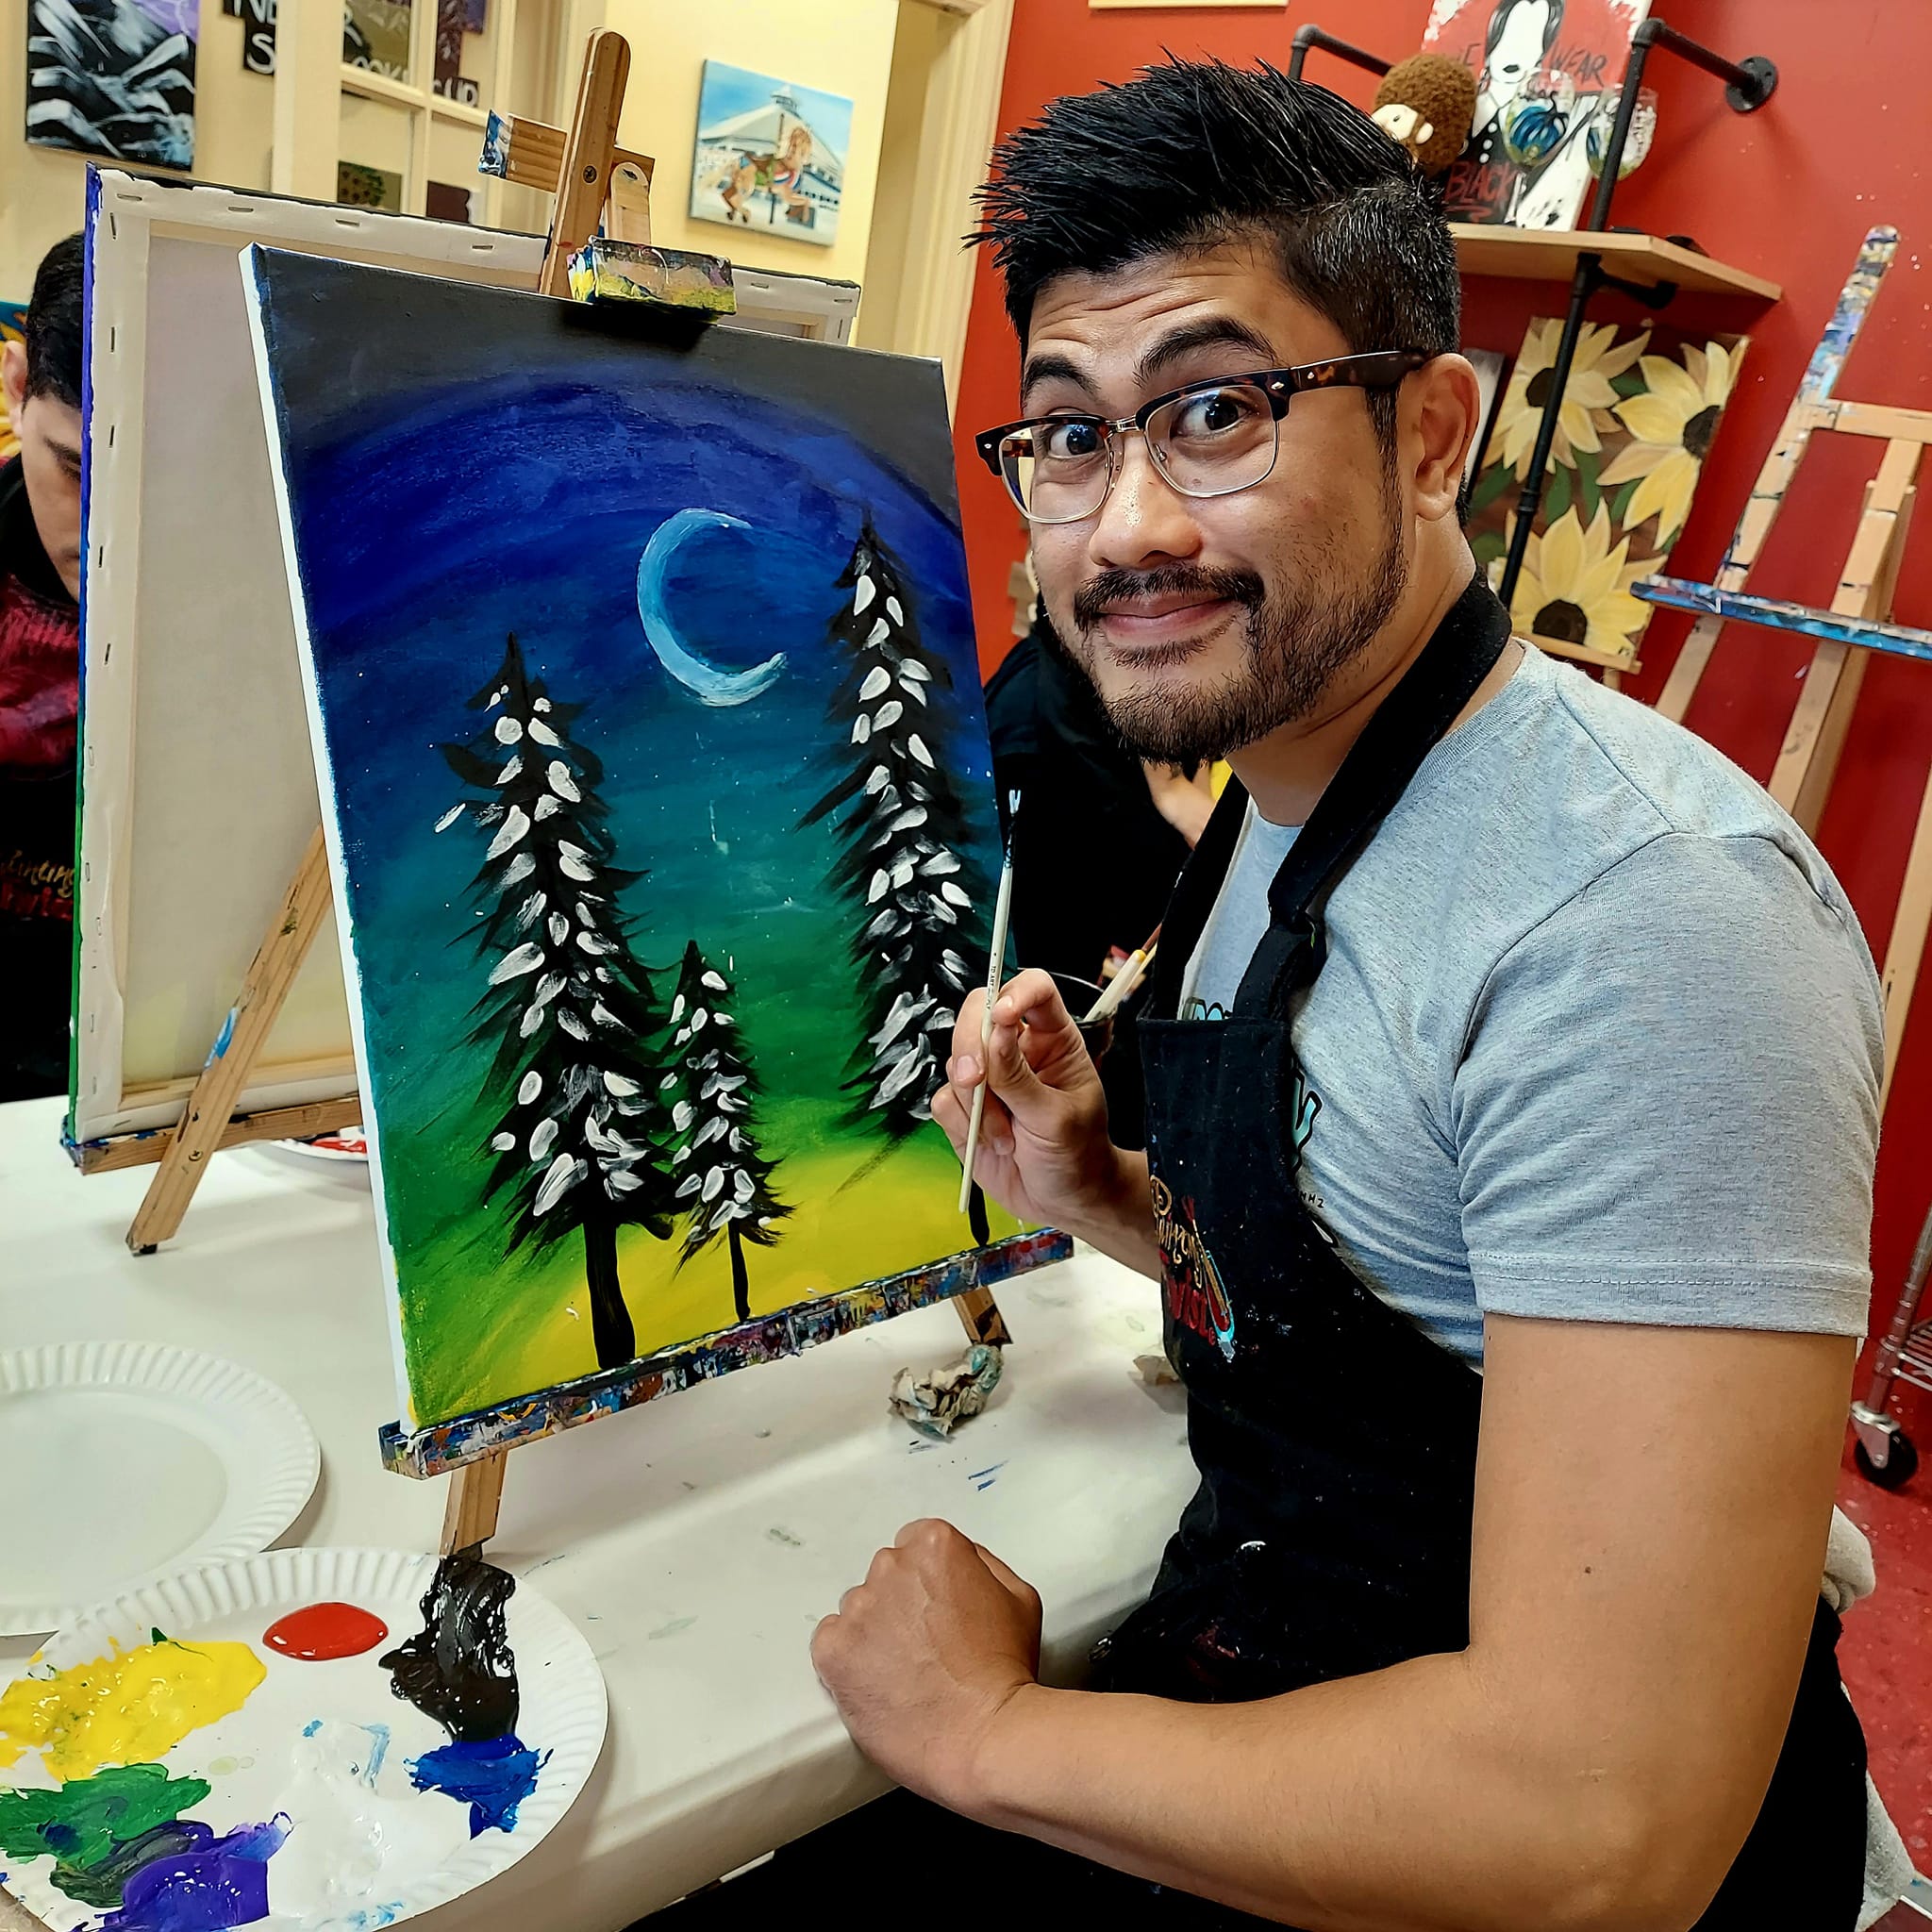 Dr. Yang Painting a Winter Scene